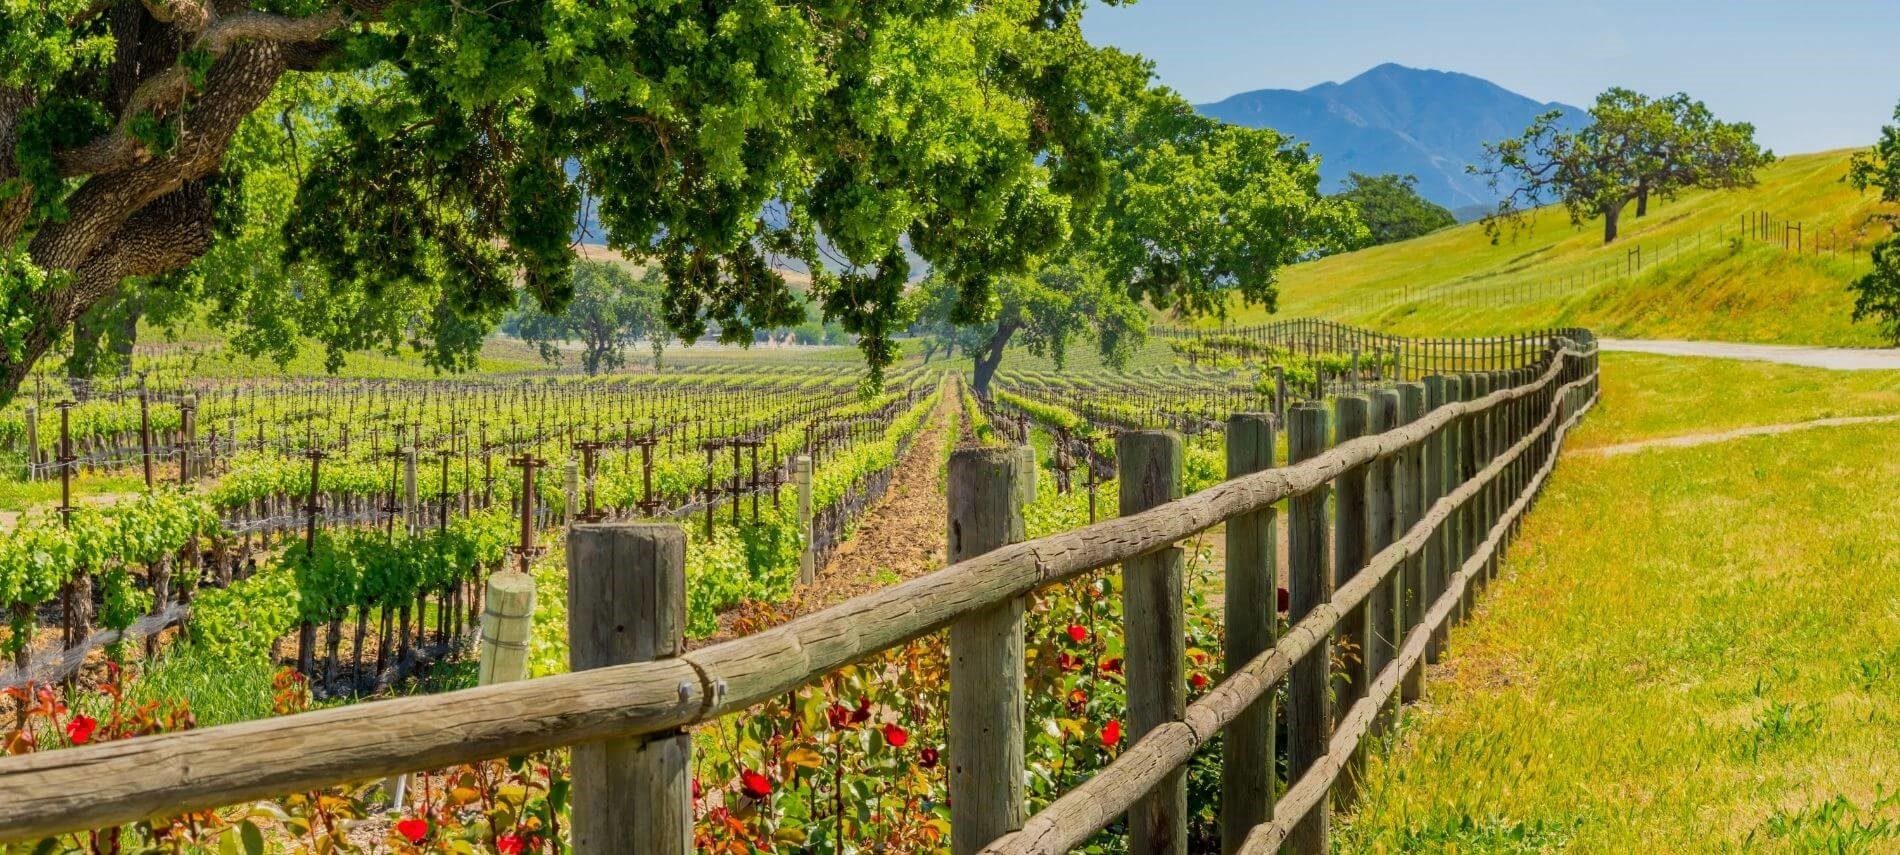 View of vineyard fenced in with roses along fence and mountains in the background